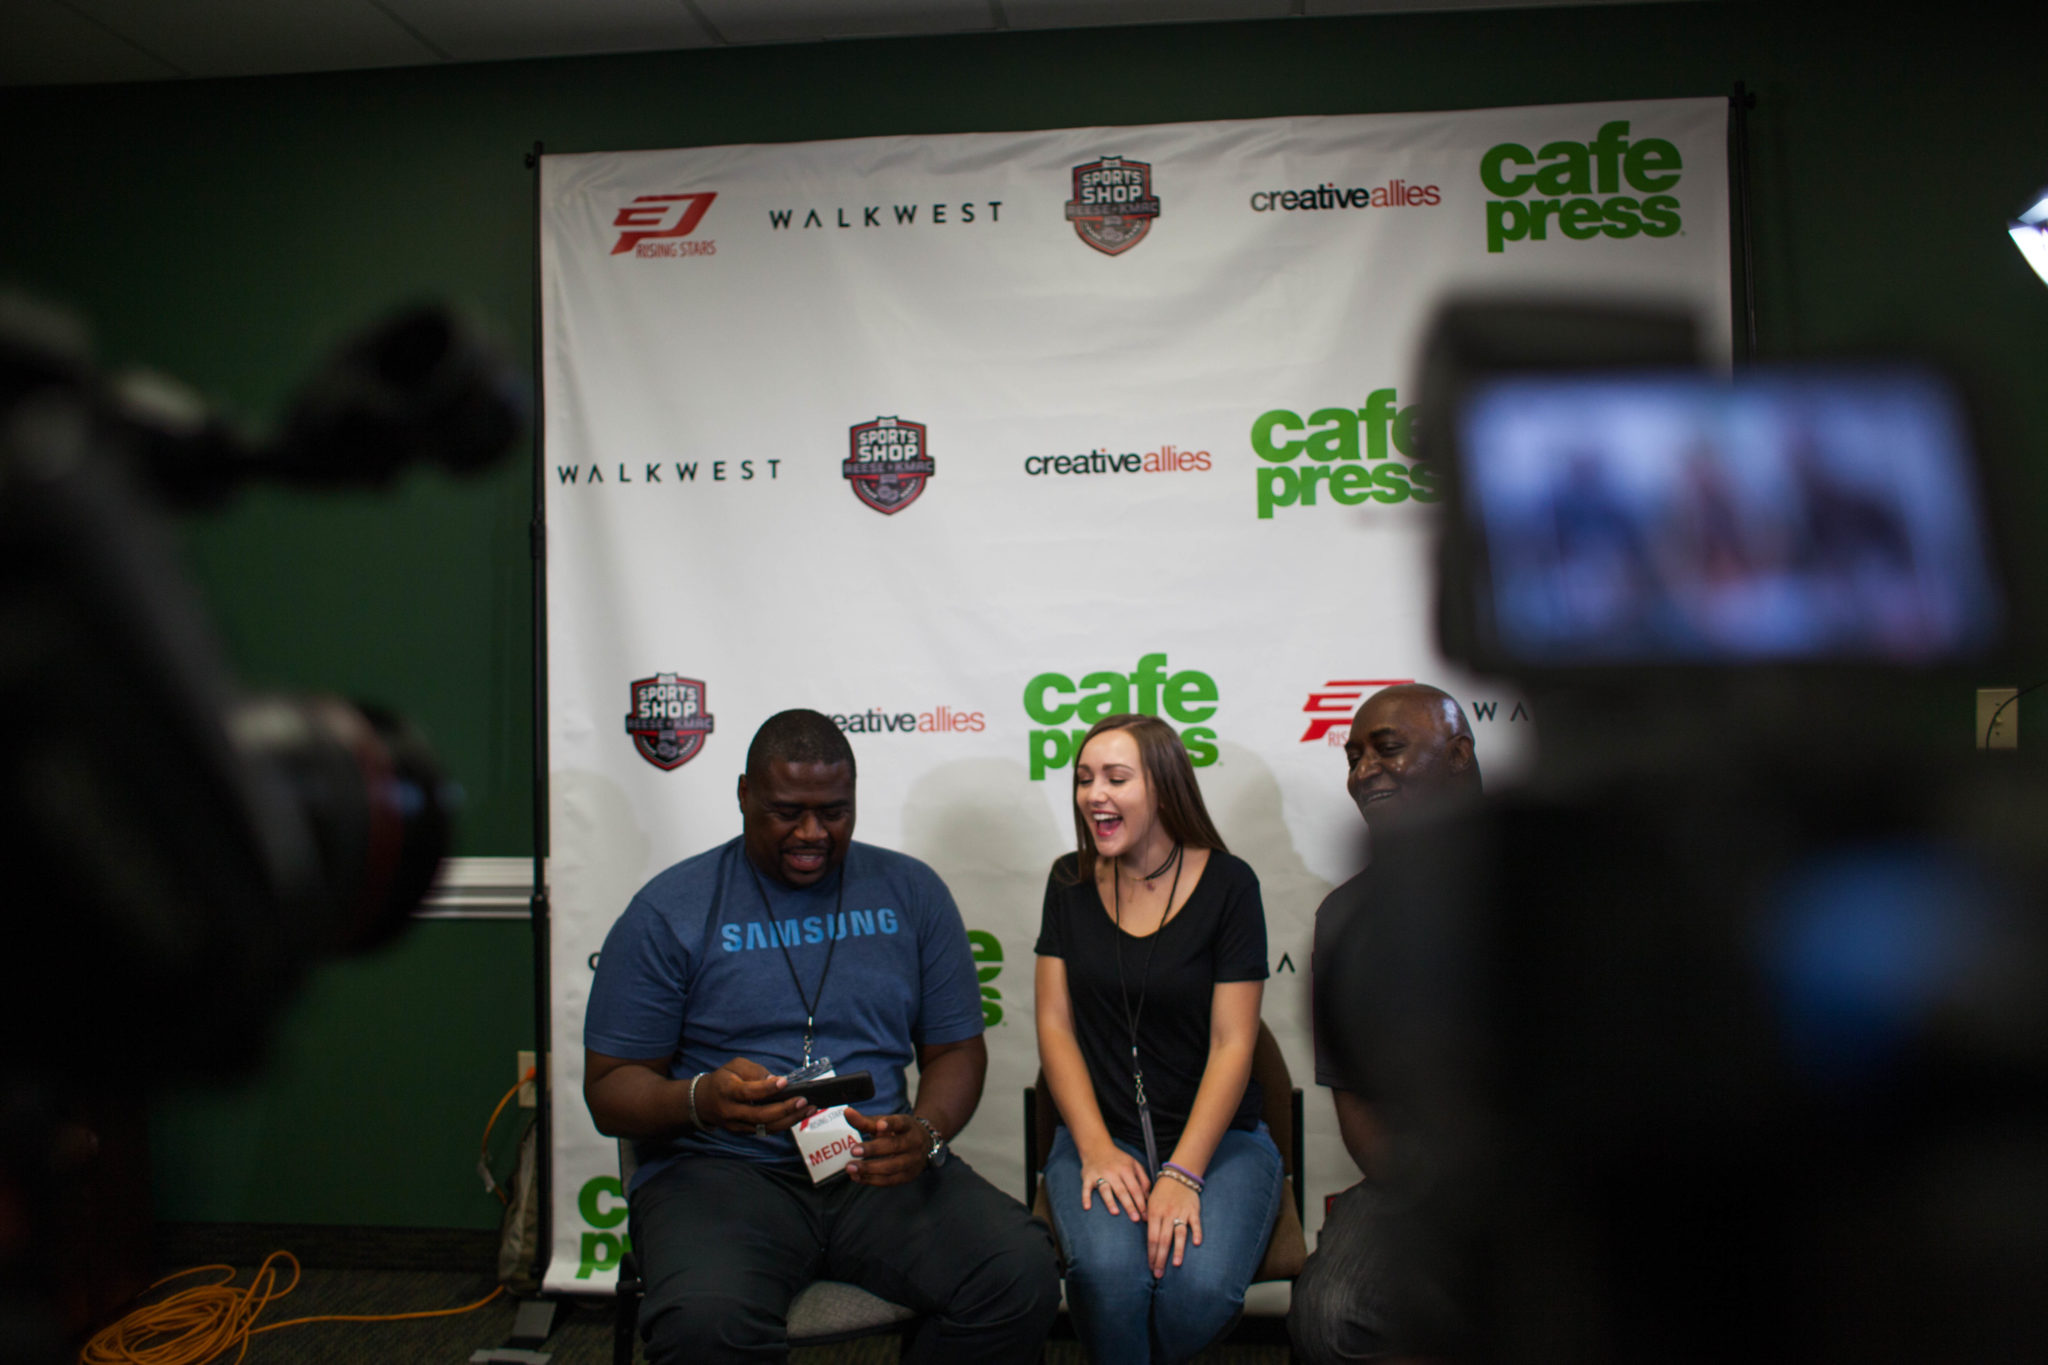 Digital Marketer & Photographer, Candace Herrell, Prepping for Chris Paul (CP3) Interview with the Sports Shop Guys